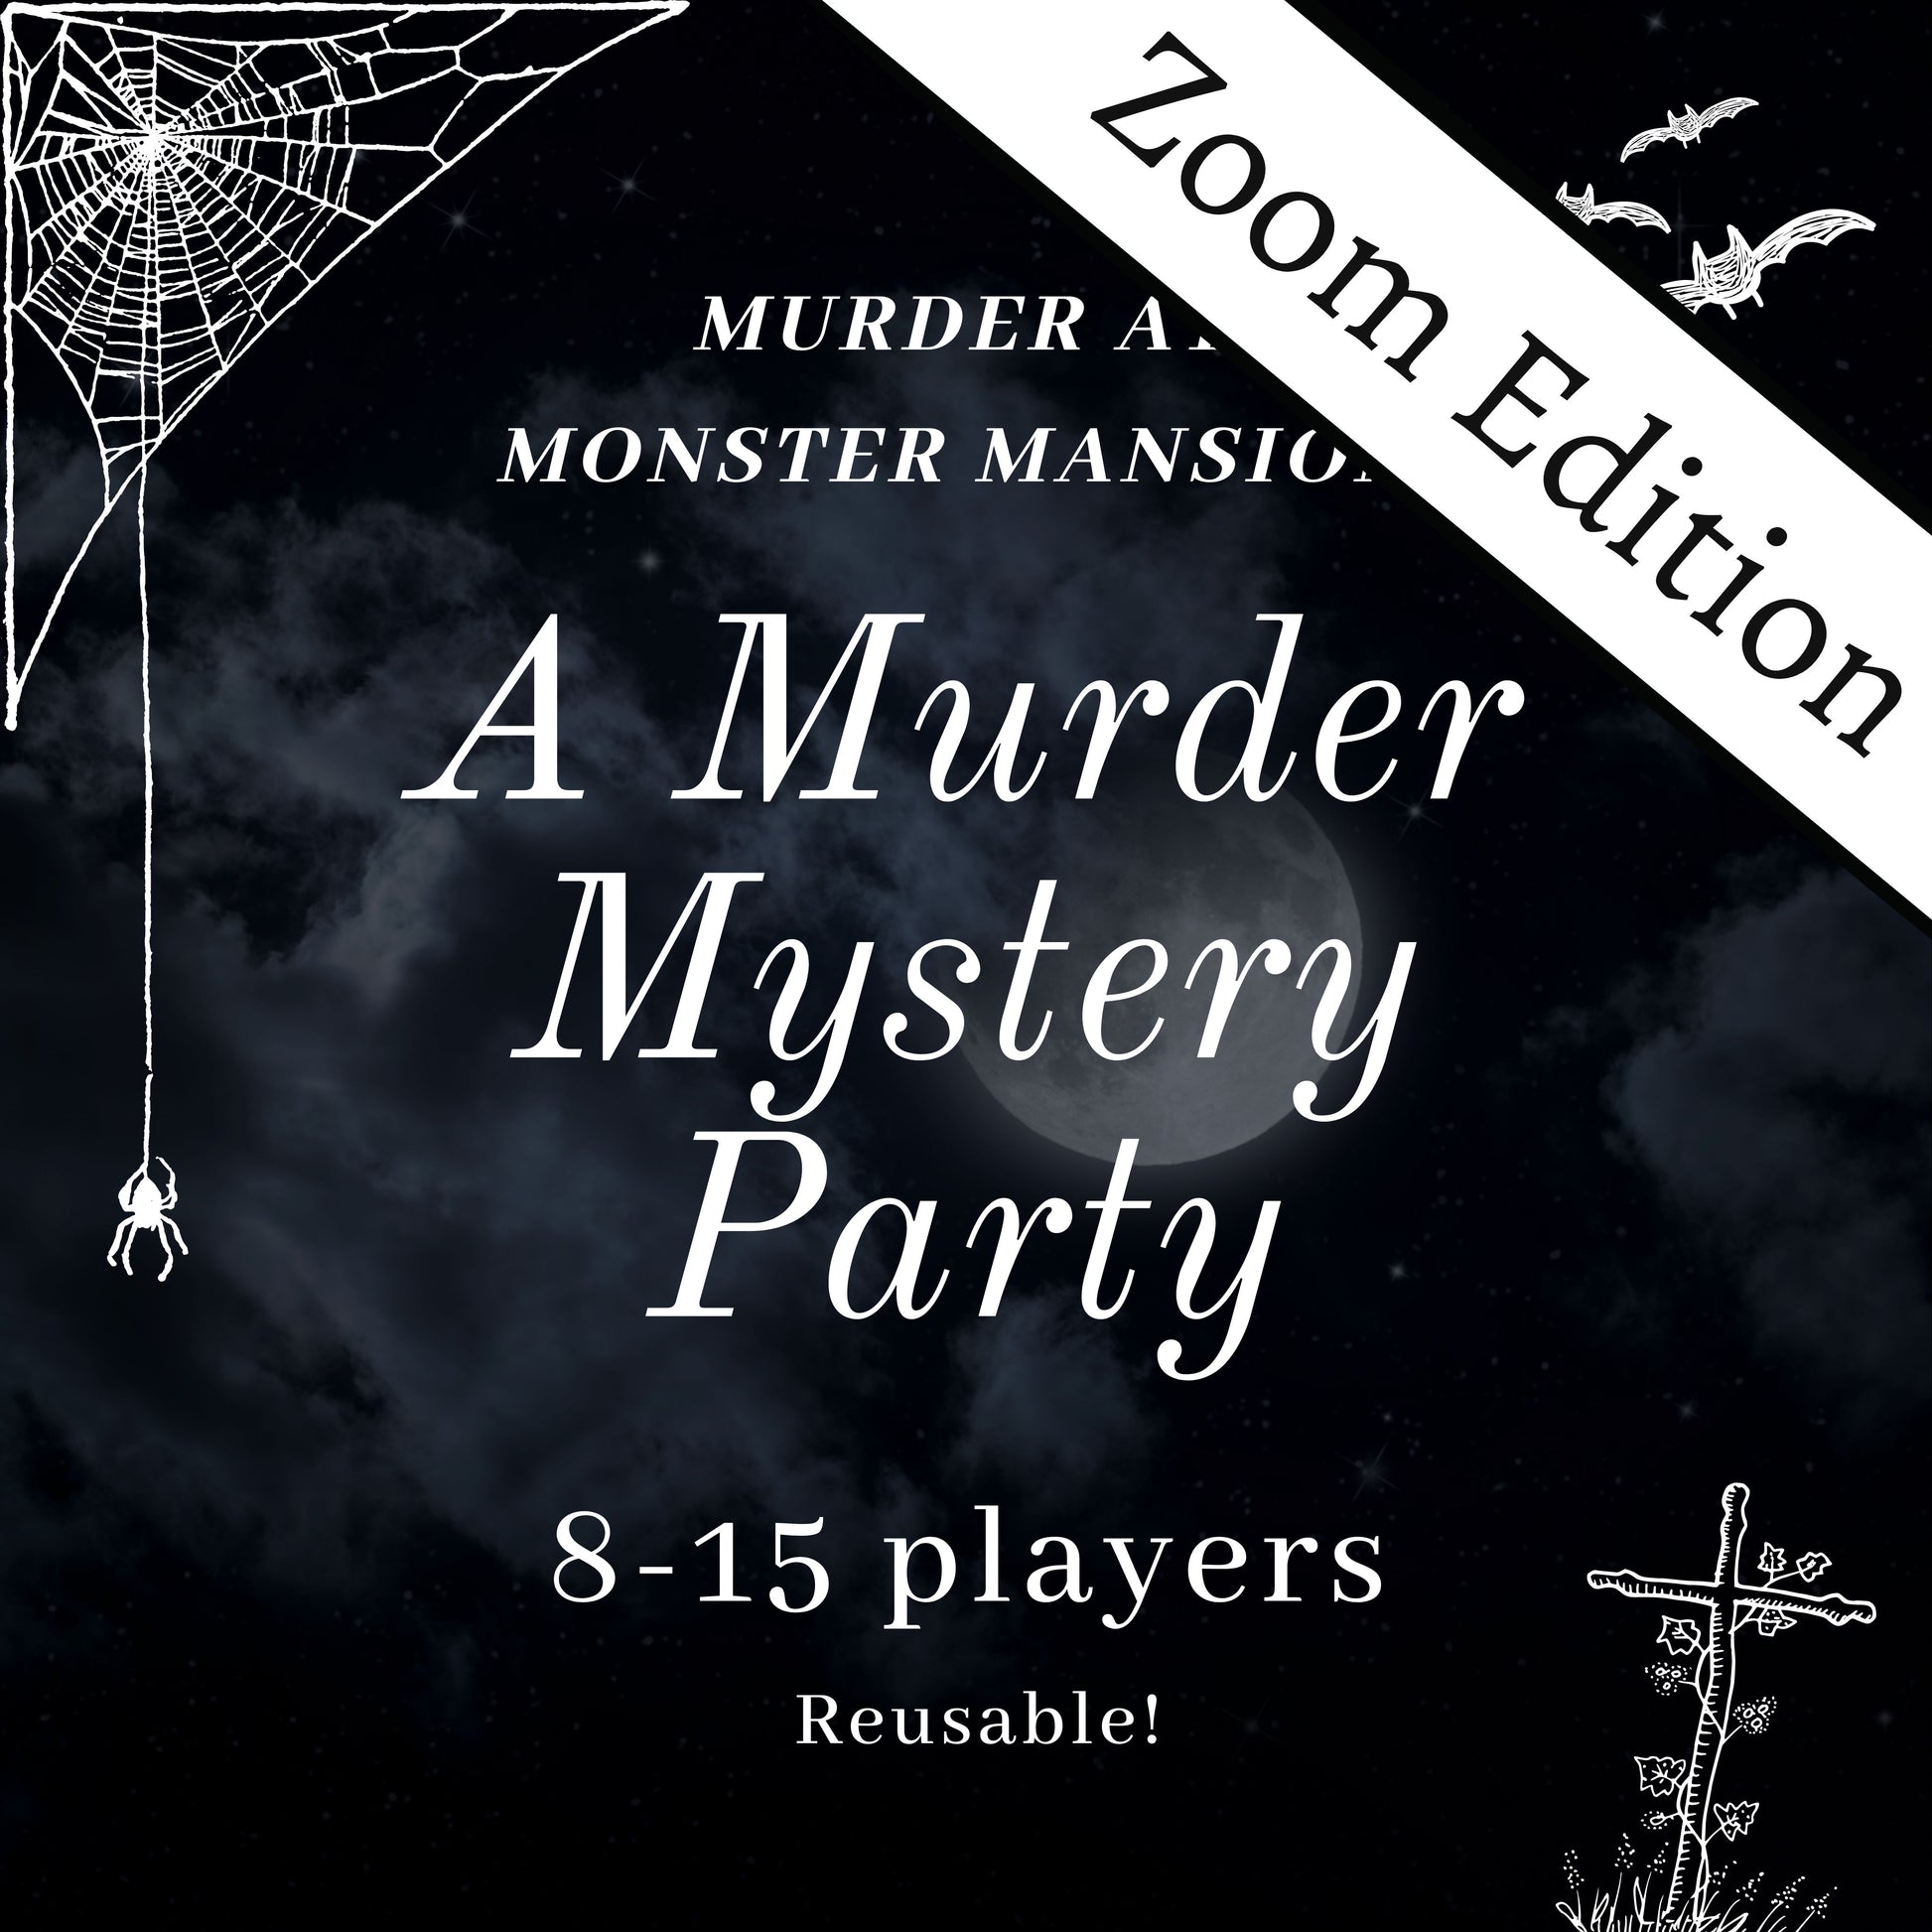 Fun and colourful fully scripted Monster Mansion themed murder mystery party game for 8-15 players Zoom Edition